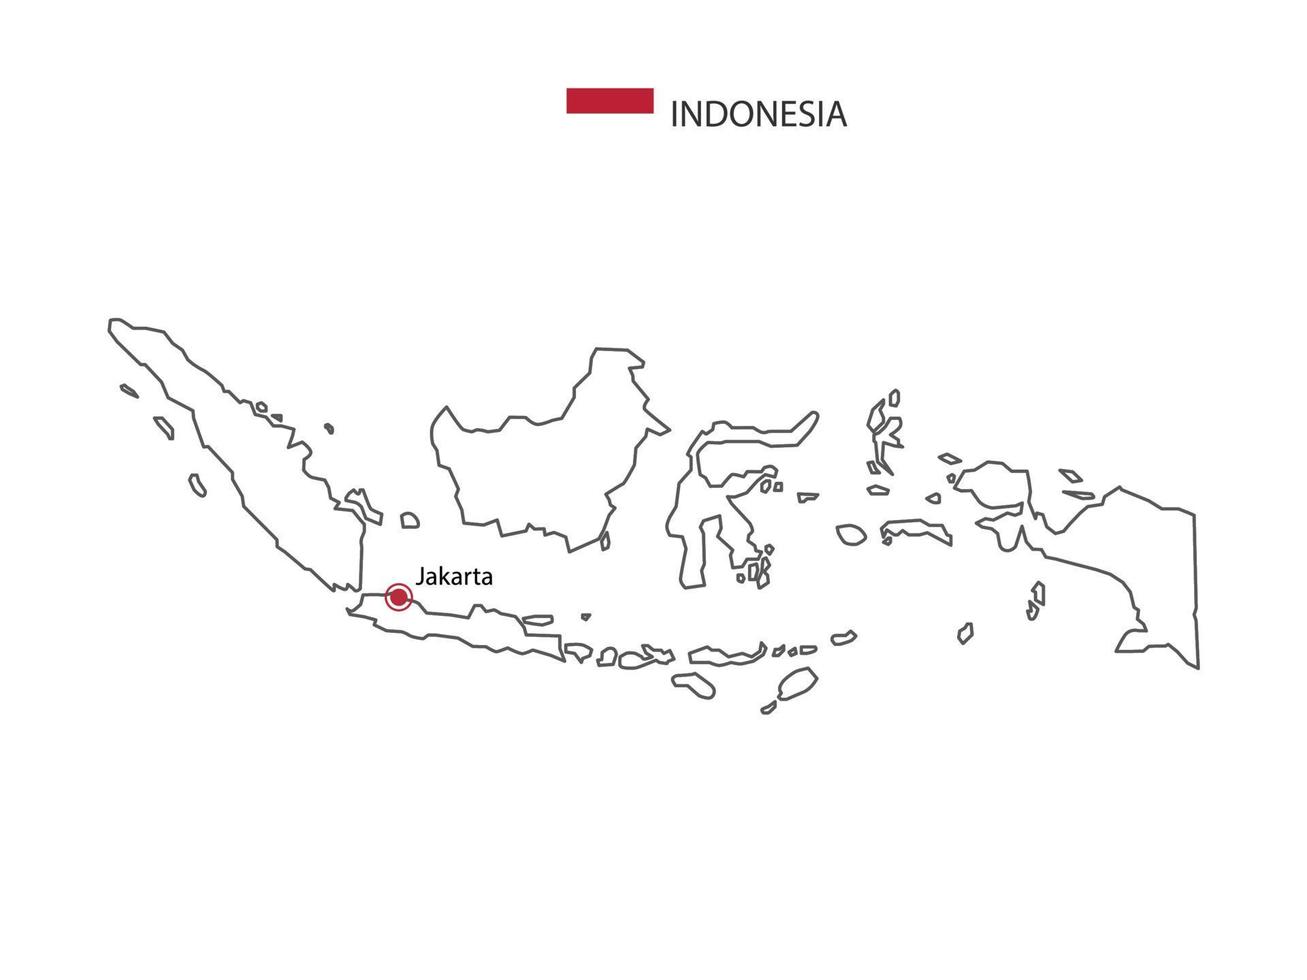 Hand draw thin black line vector of Indonesia Map with capital city Jakarta on white background.